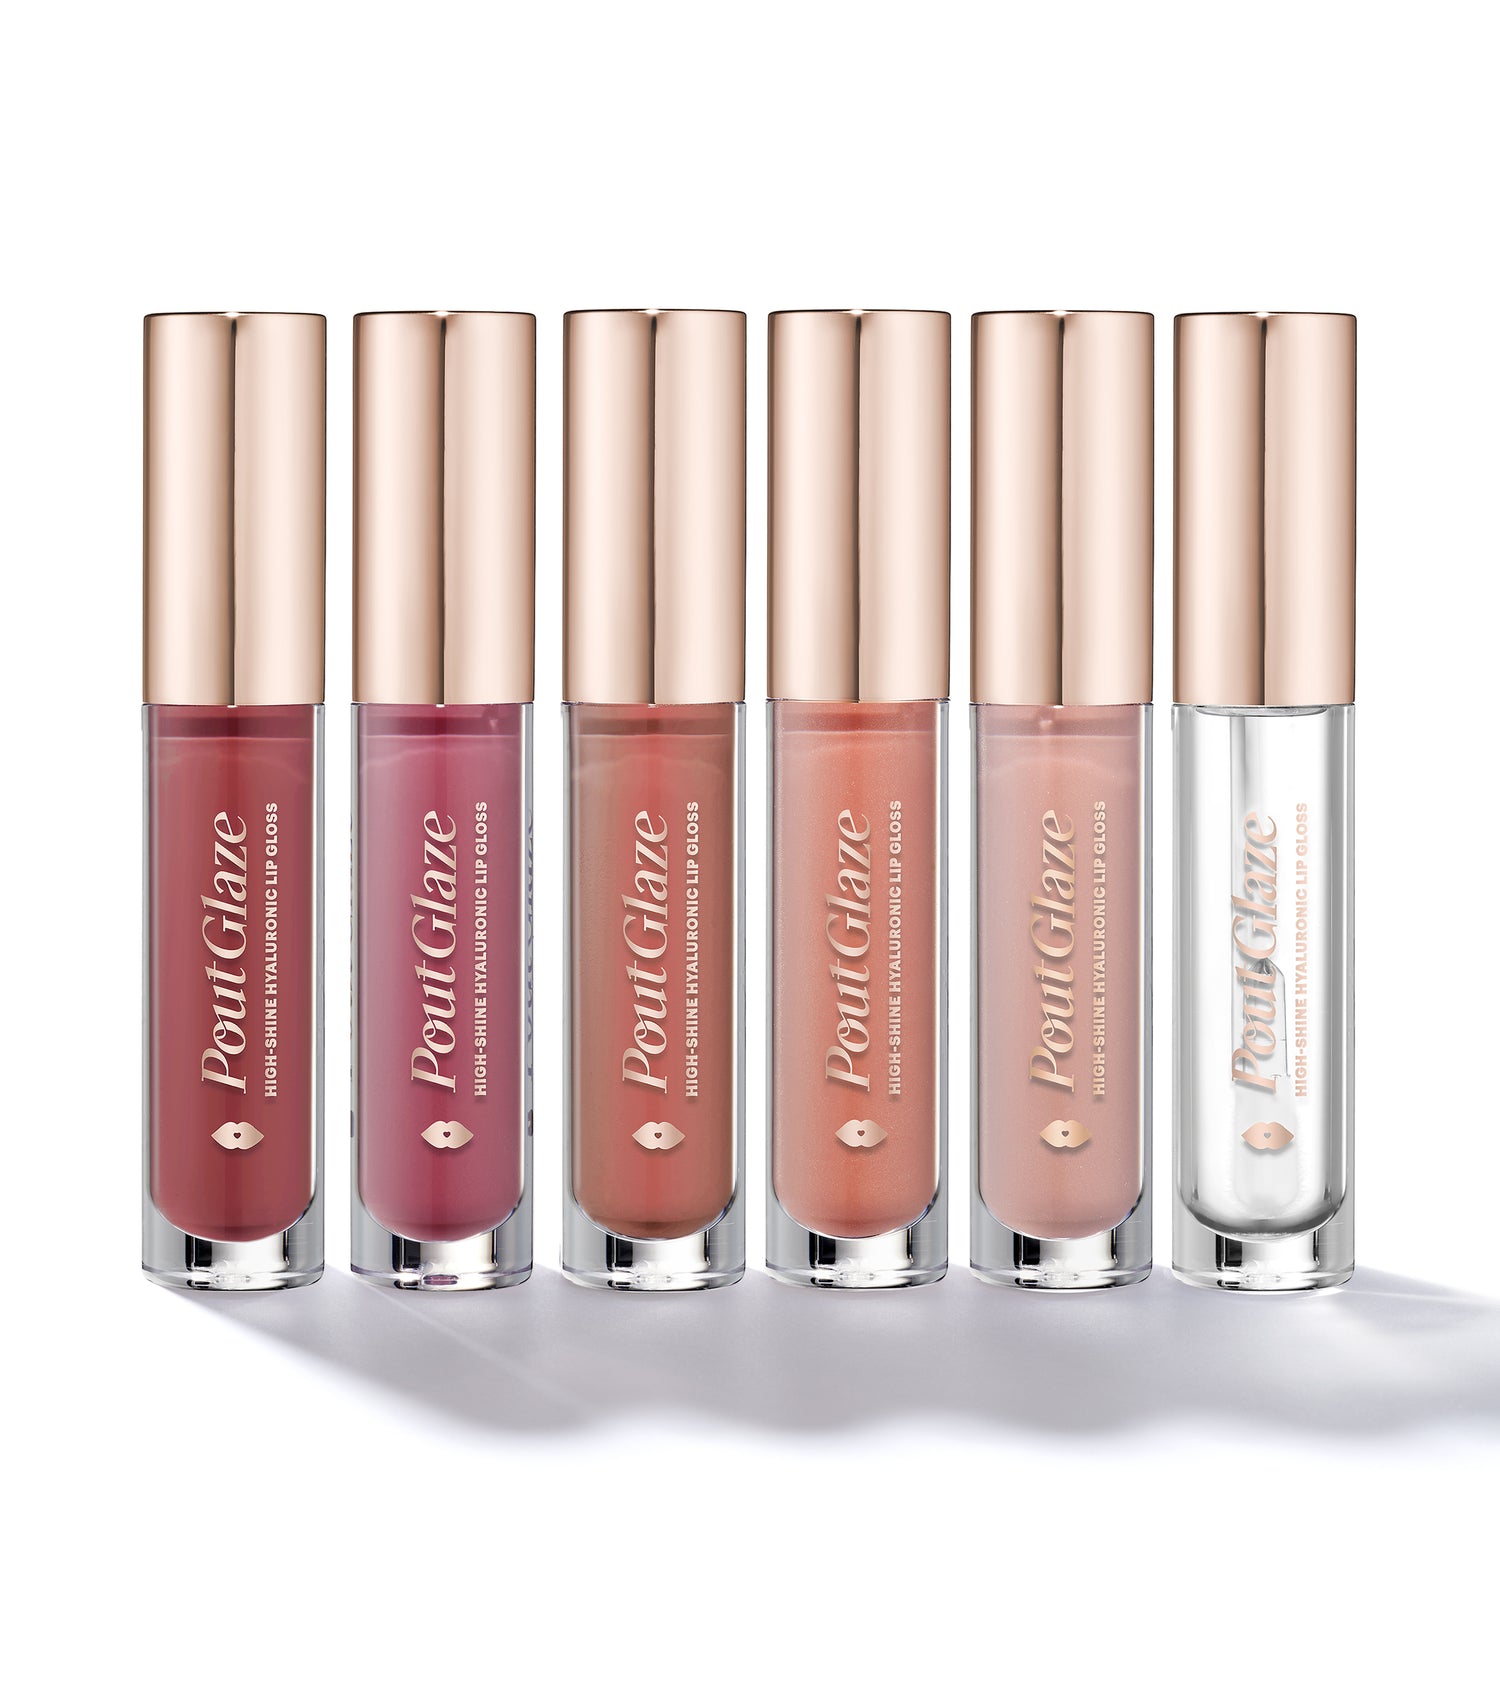 Pout Glaze High-Shine-Hyaluronic Lip Gloss (Stephanie) Main Image featured